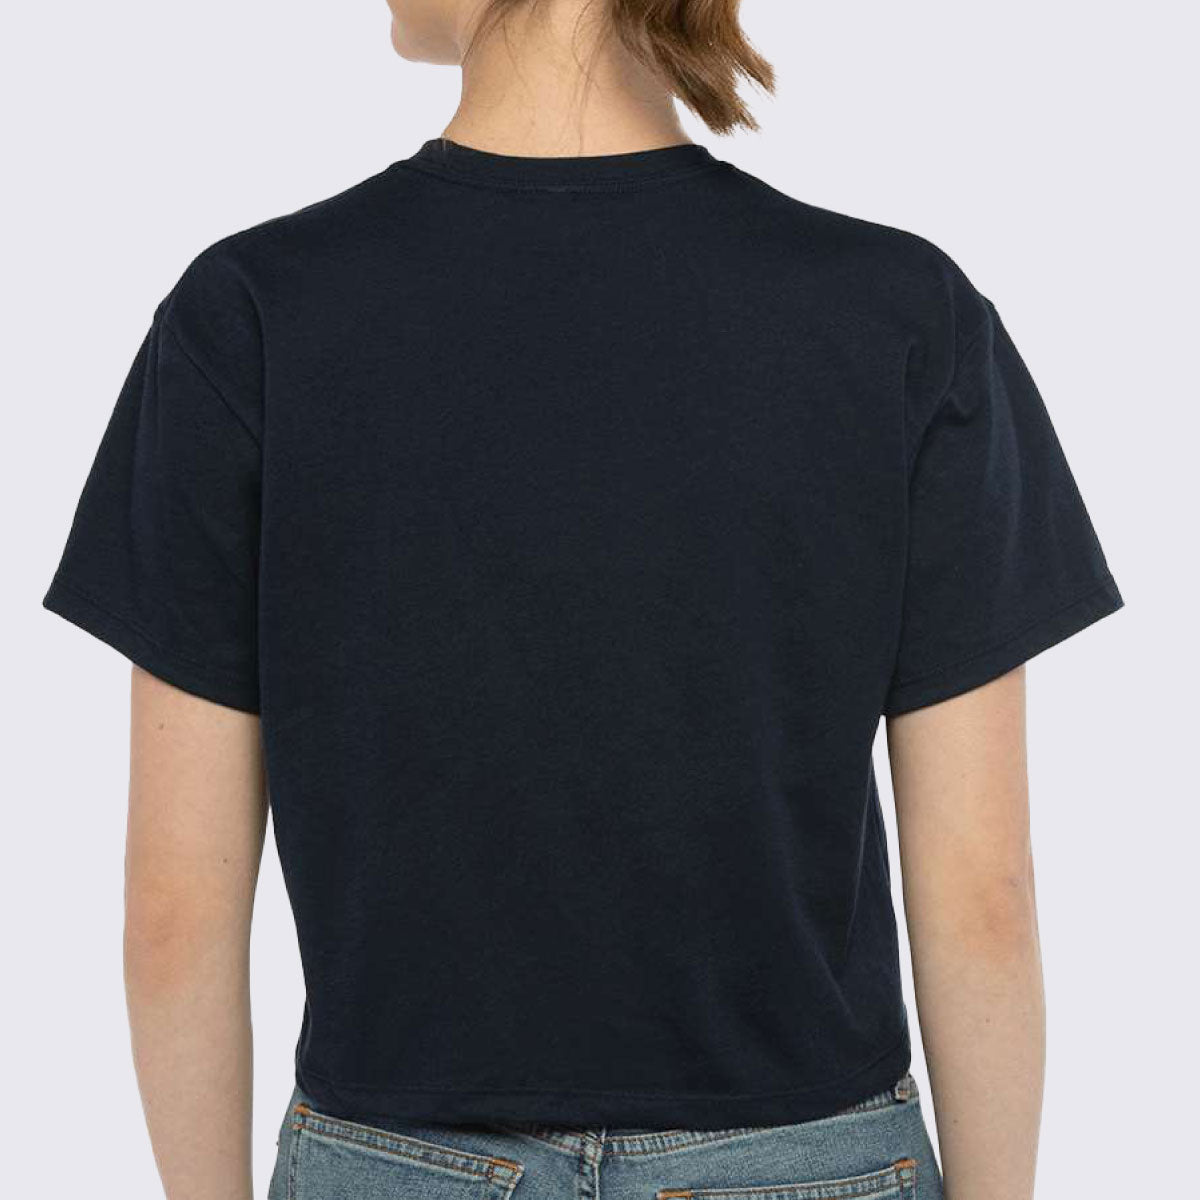 The Limit Does Not Exist Women’s Ideal Crop Tee